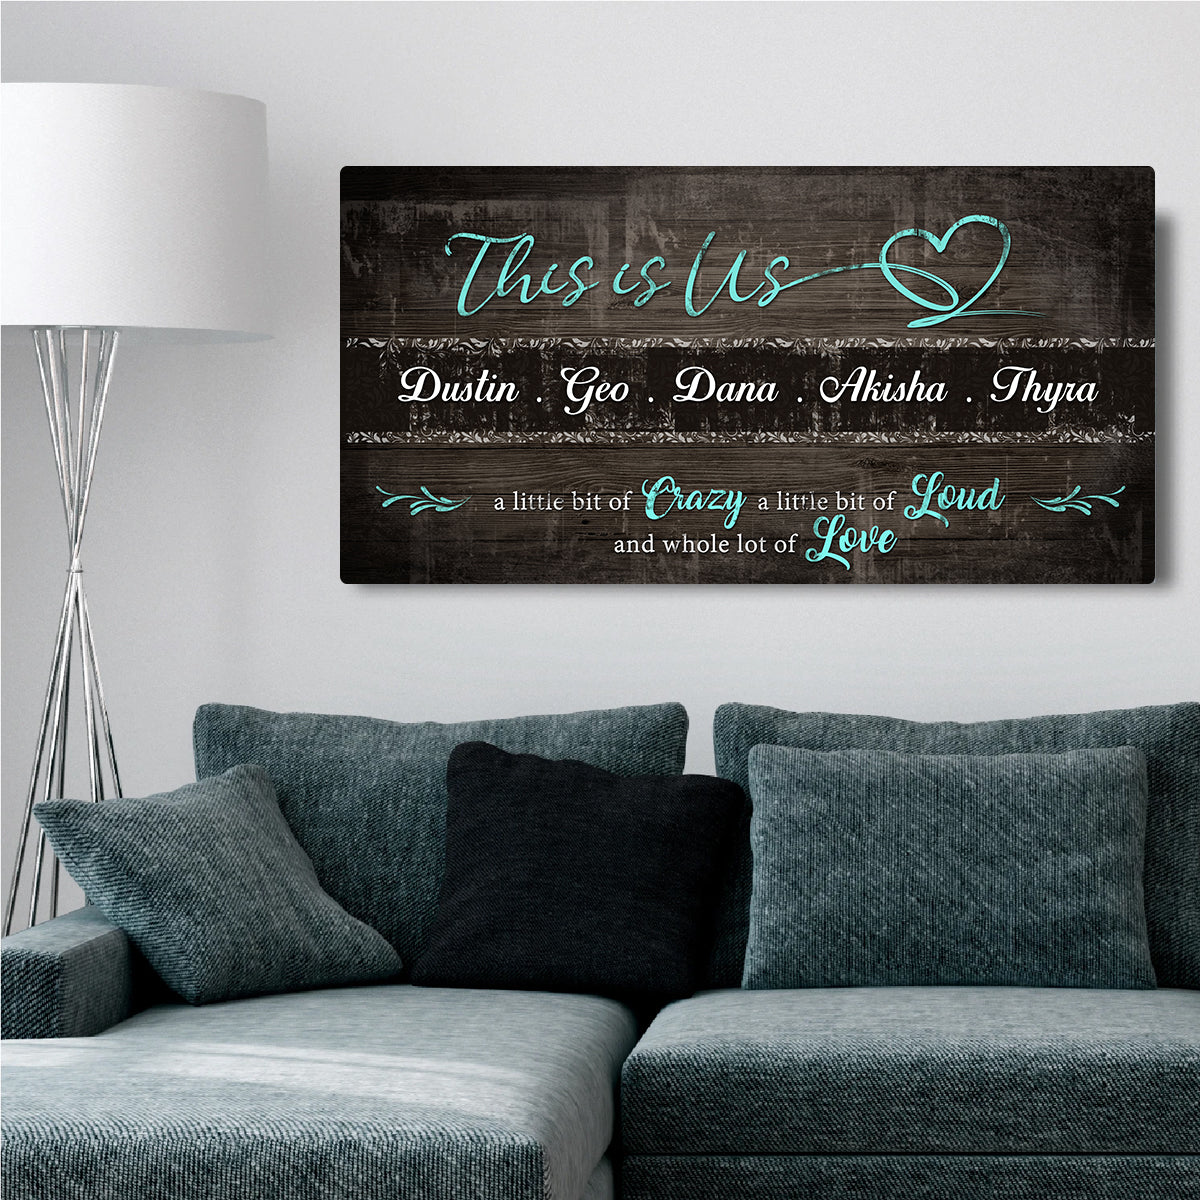 This is Us Sign - Image by Tailored Canvases